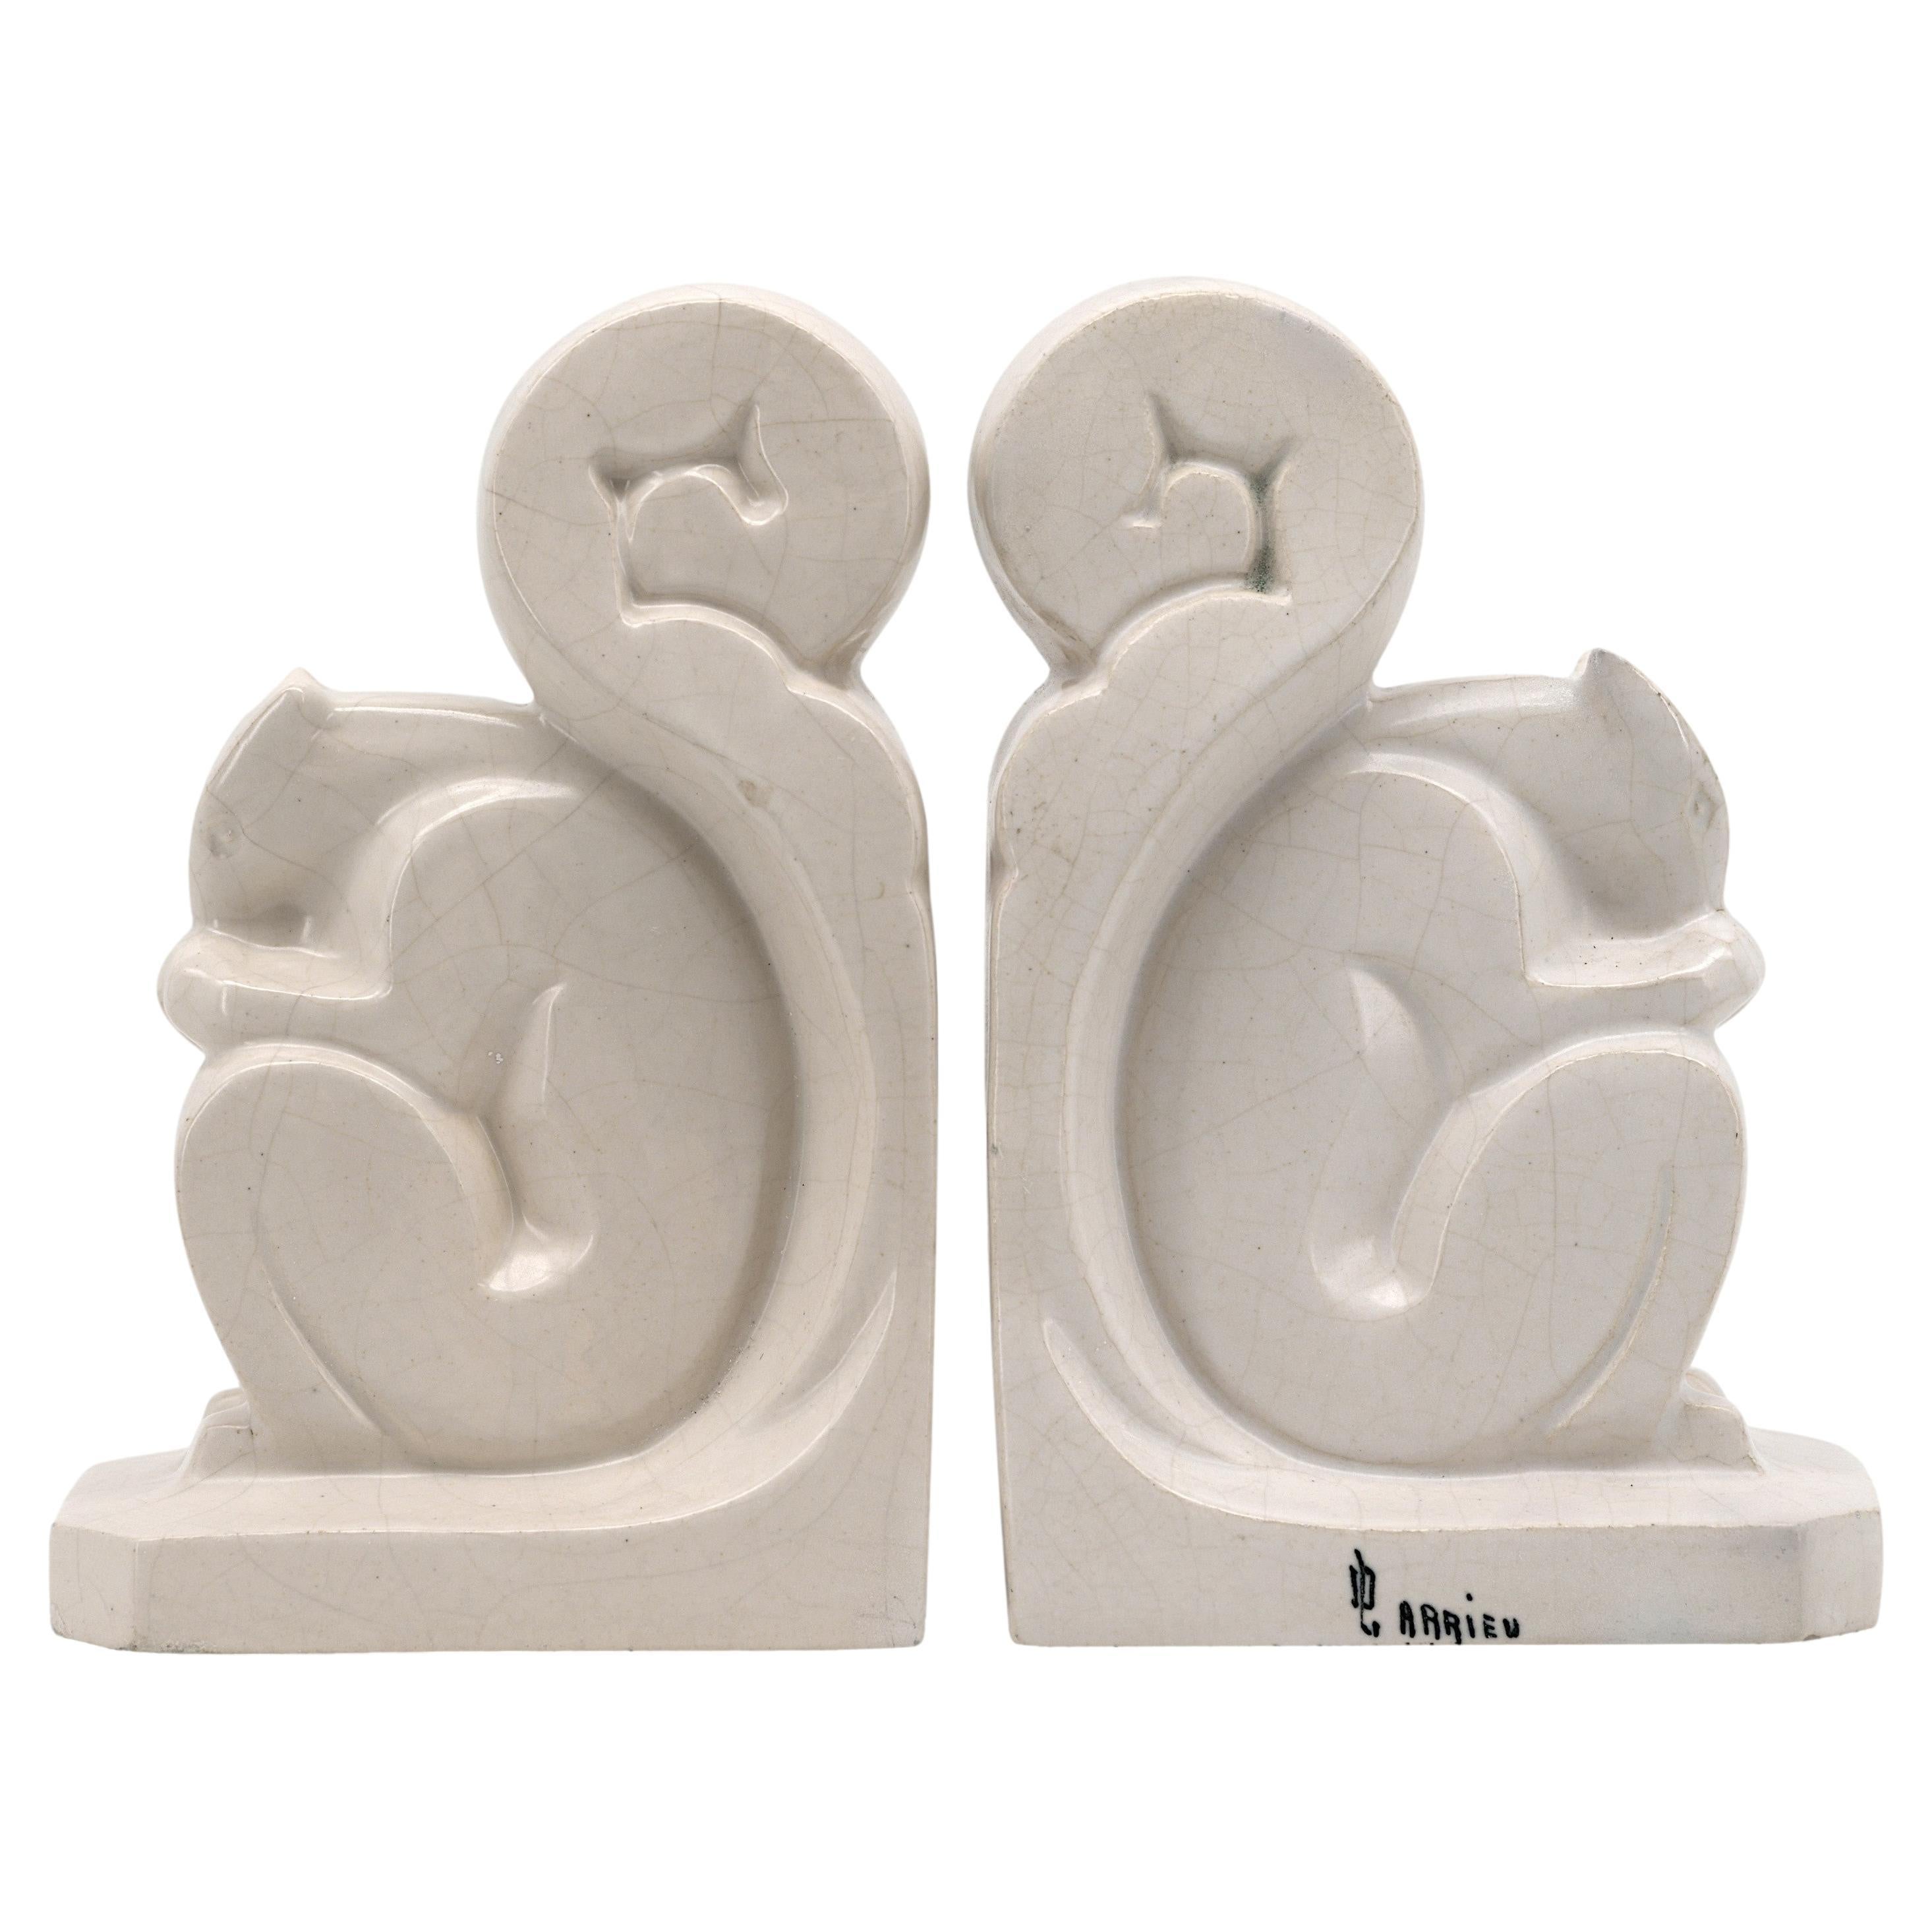 Octave LARRIEU French Art Deco Squirrel Bookends Pair, 1930s